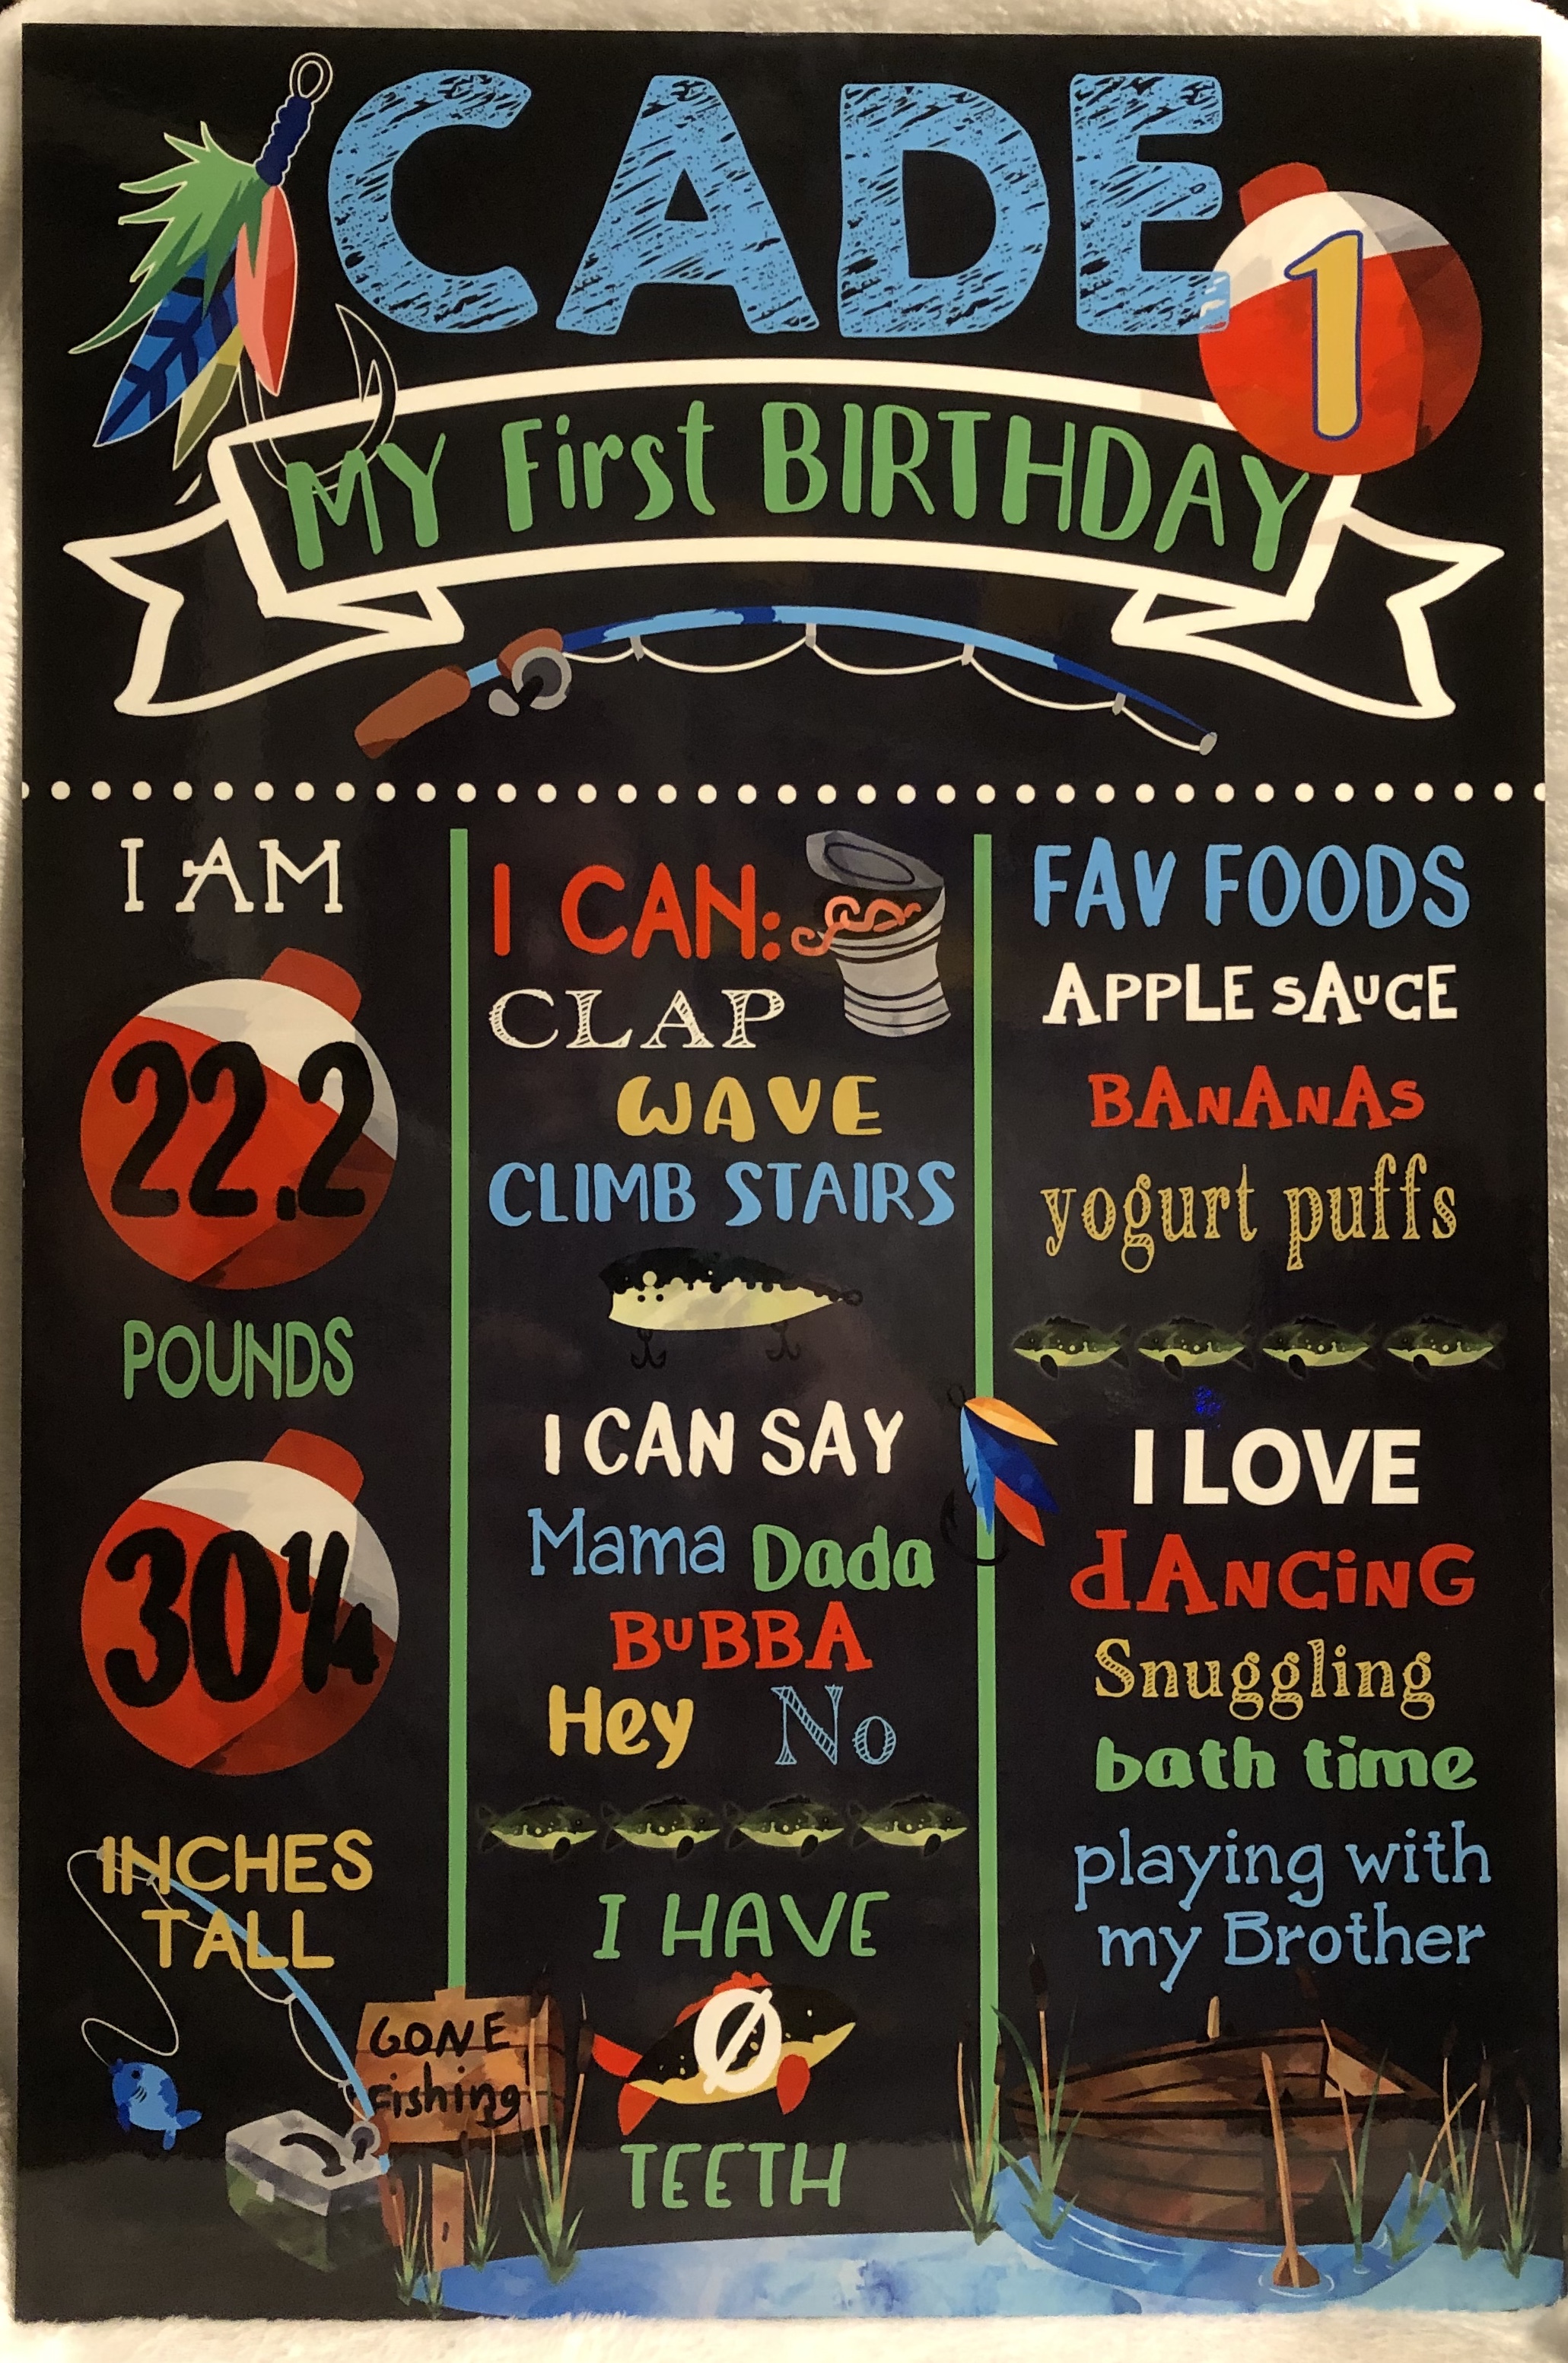 All about me Birthday Board made with sublimation printing